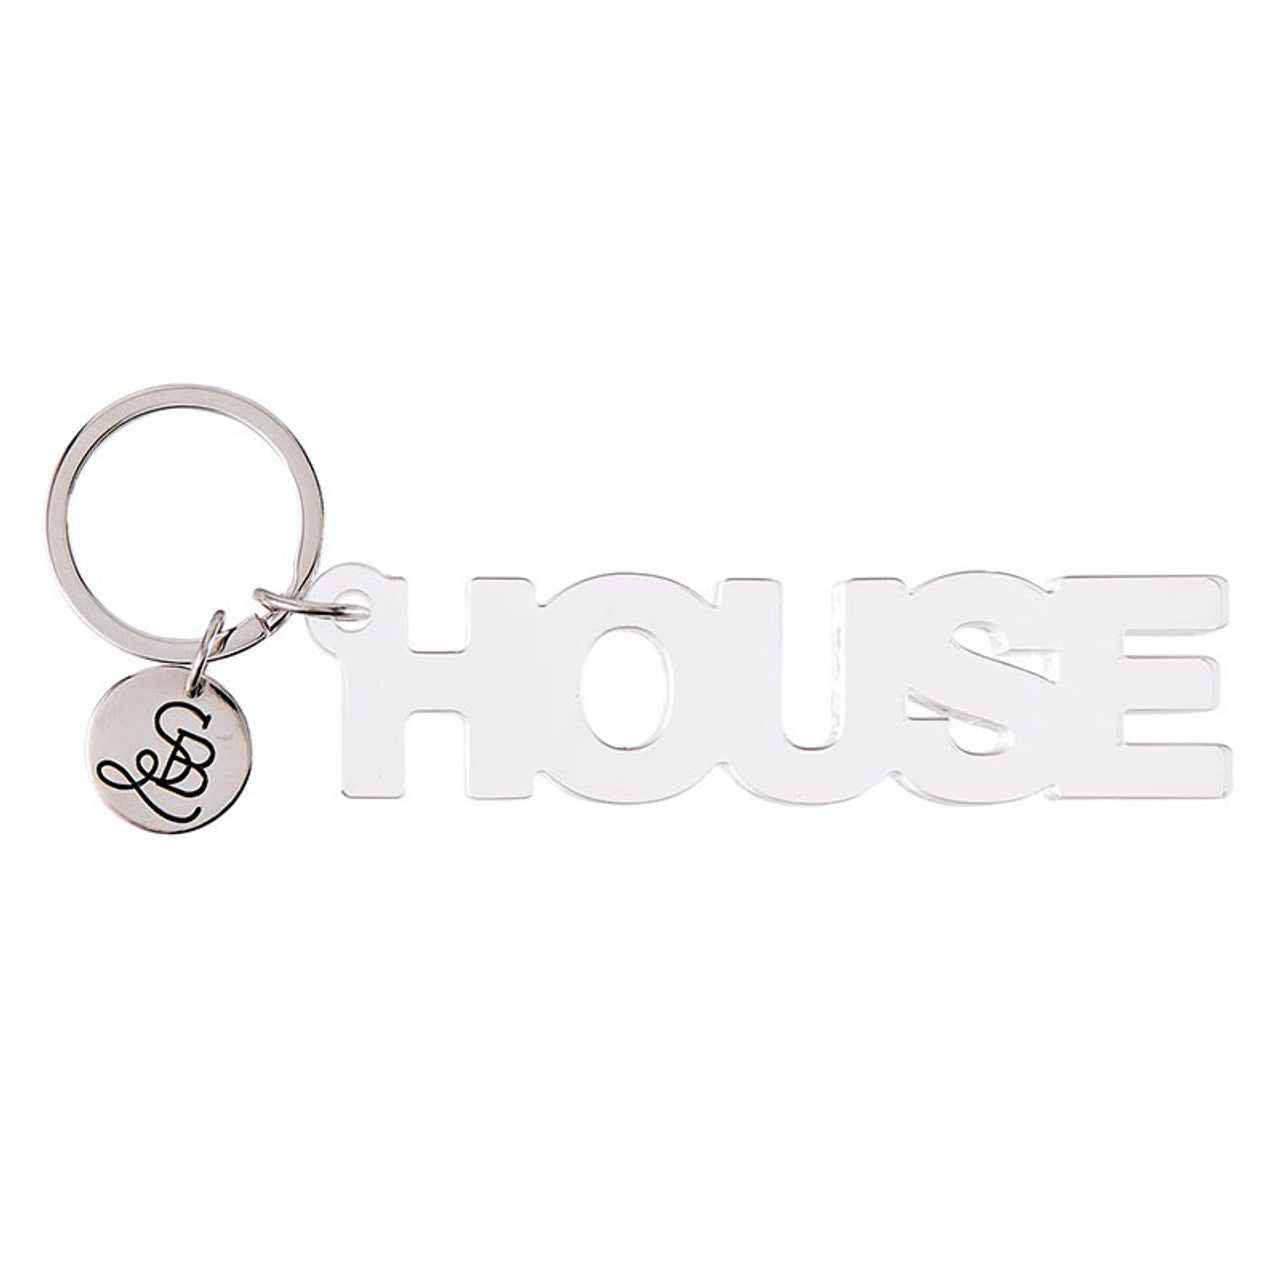 House Acrylic Word Keychain | Transparent Clear Word Shaped Key Ring Holder